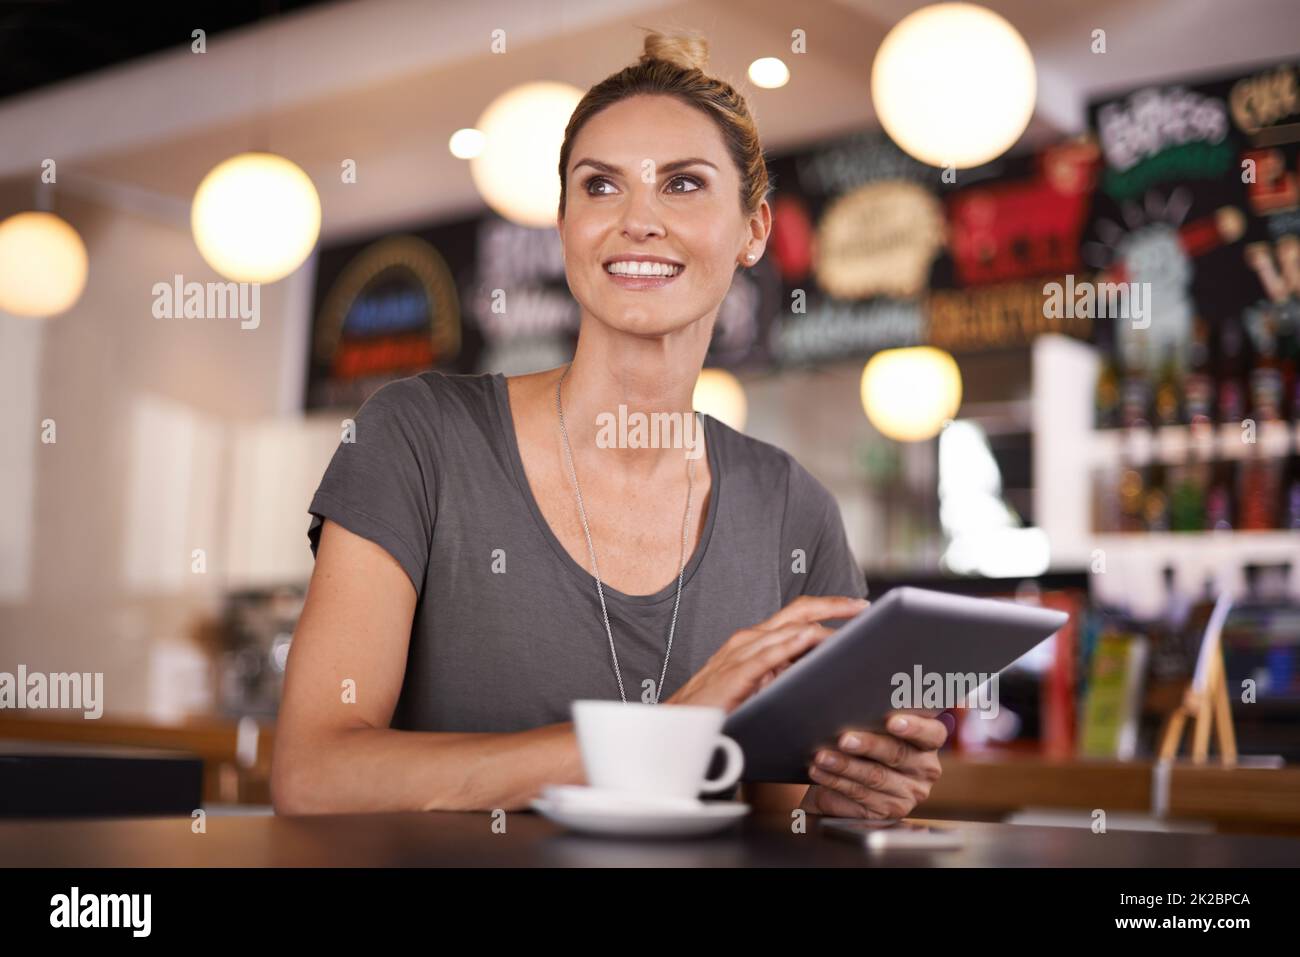 My weather app was right - its a beautiful day. A beautiful young woman using her tablet at a coffee shop. Stock Photo